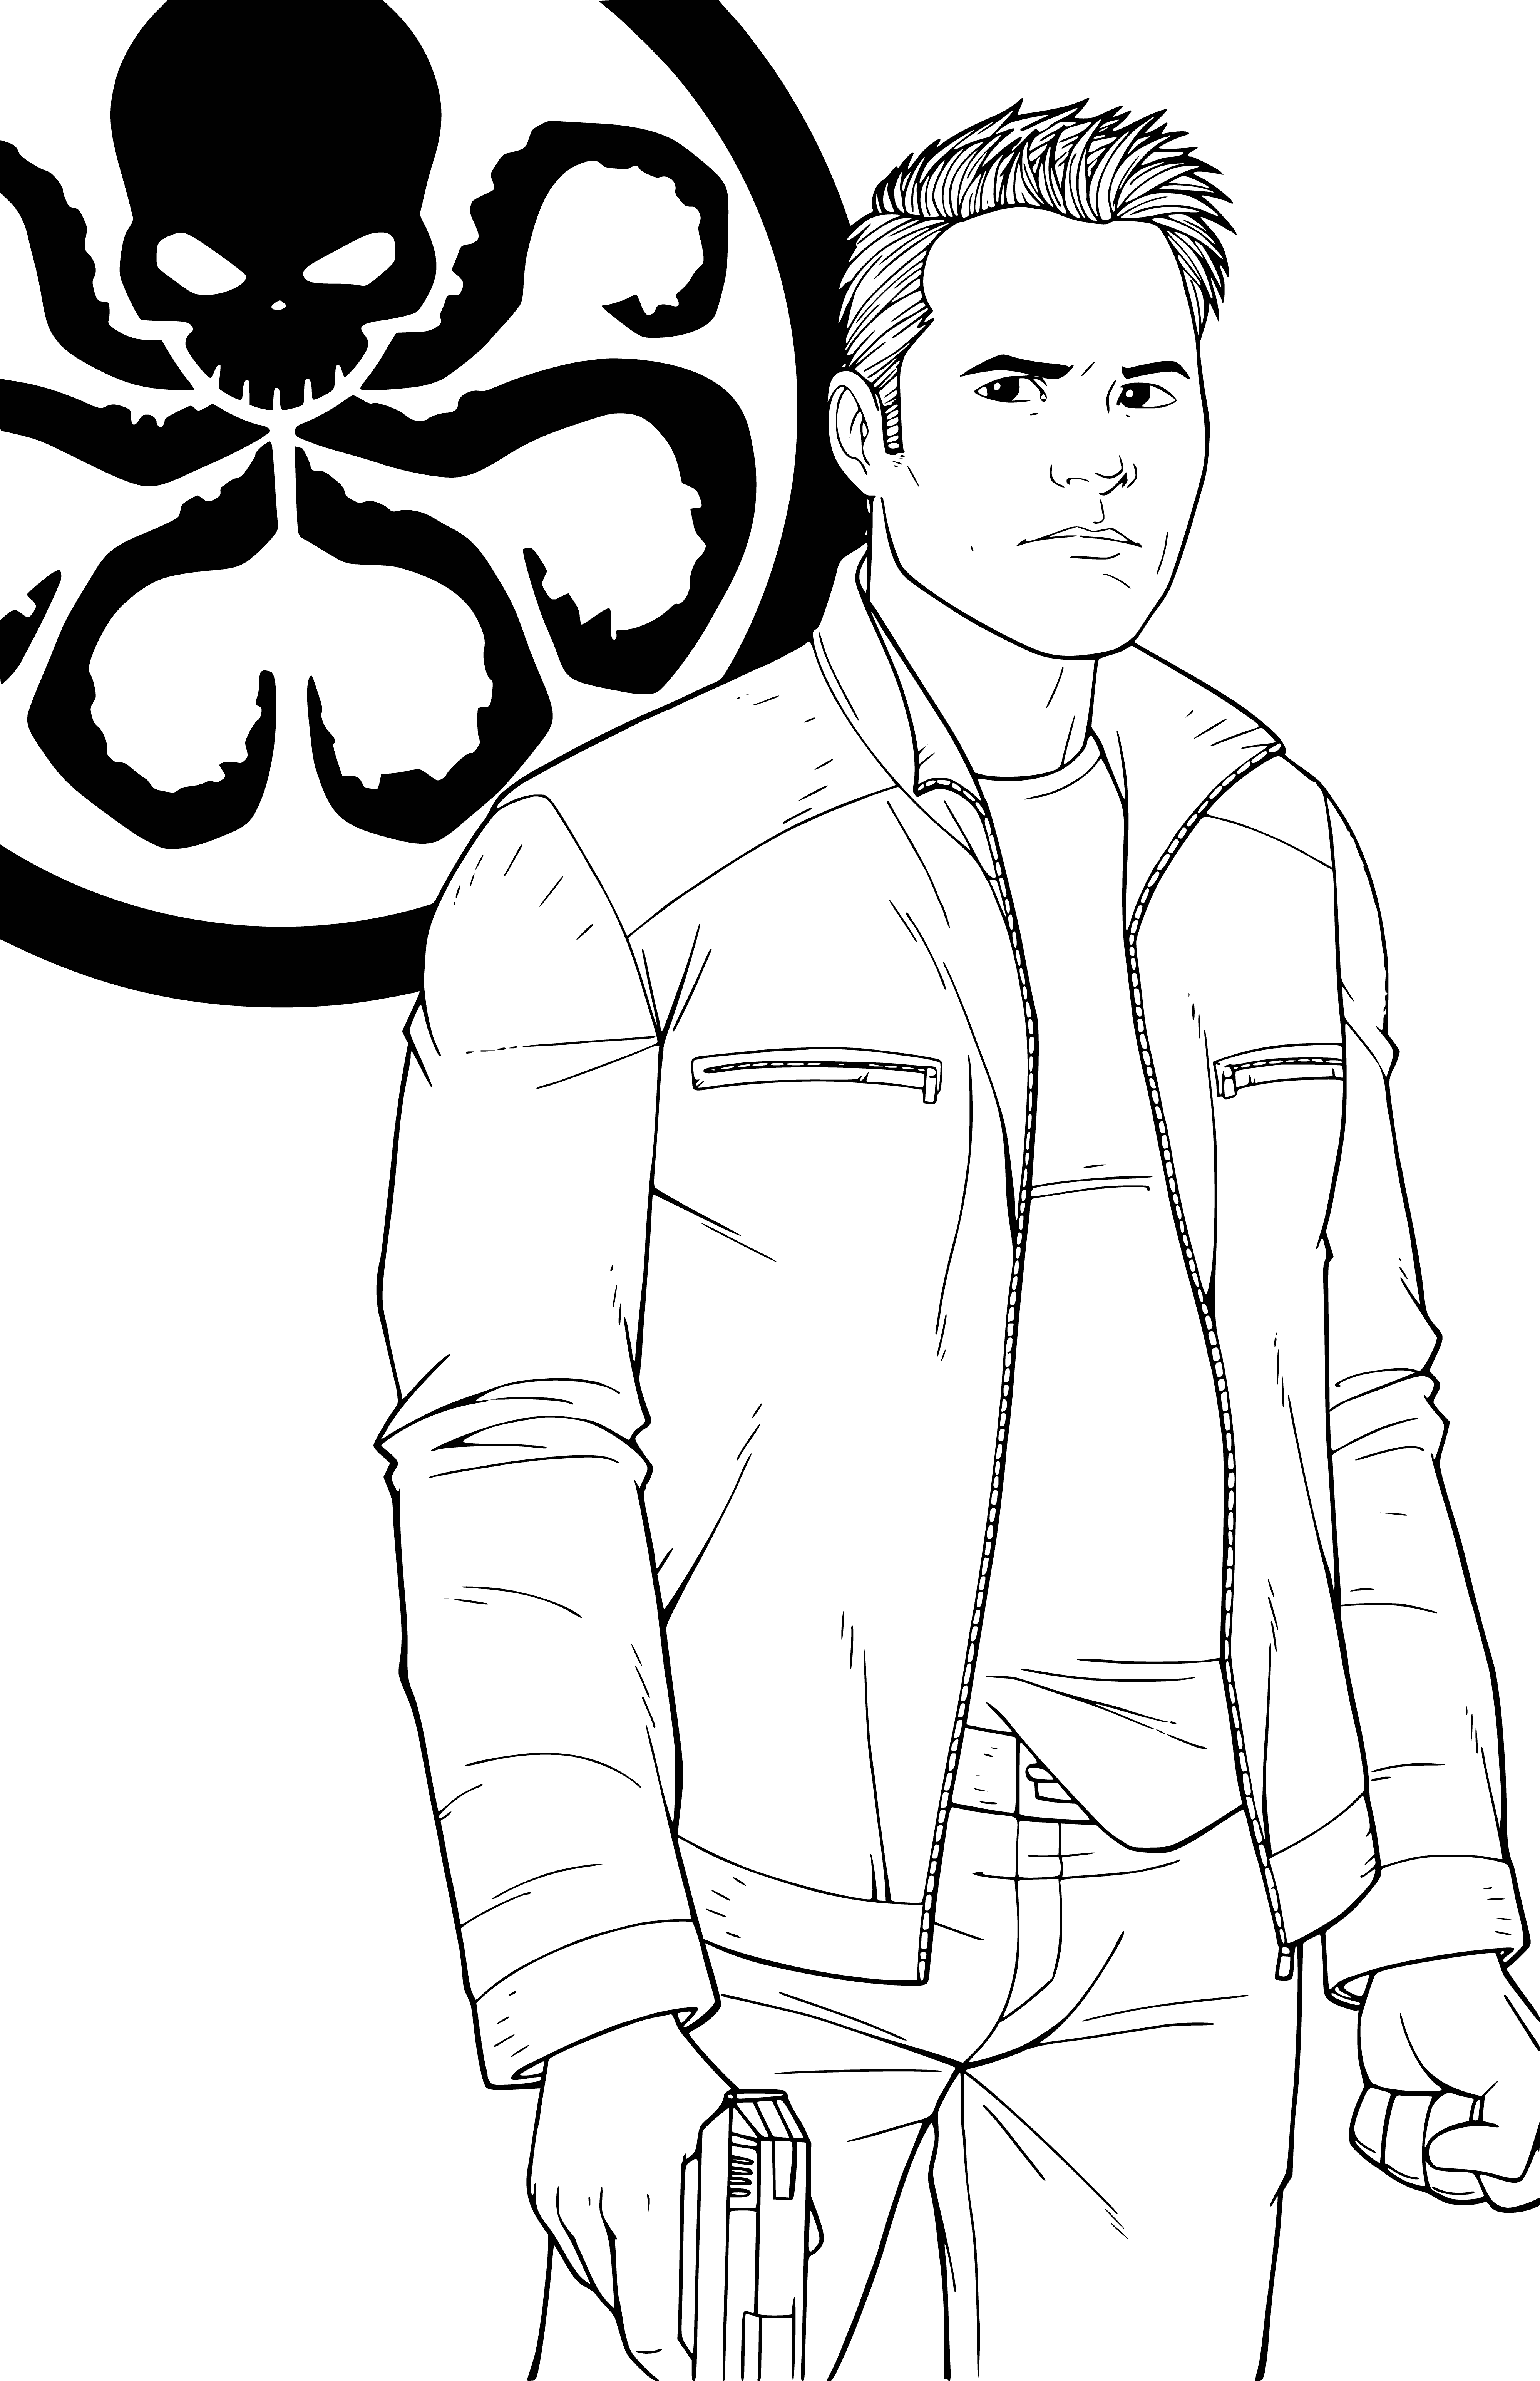 Agent SHIELD T. Grant Ward coloring page